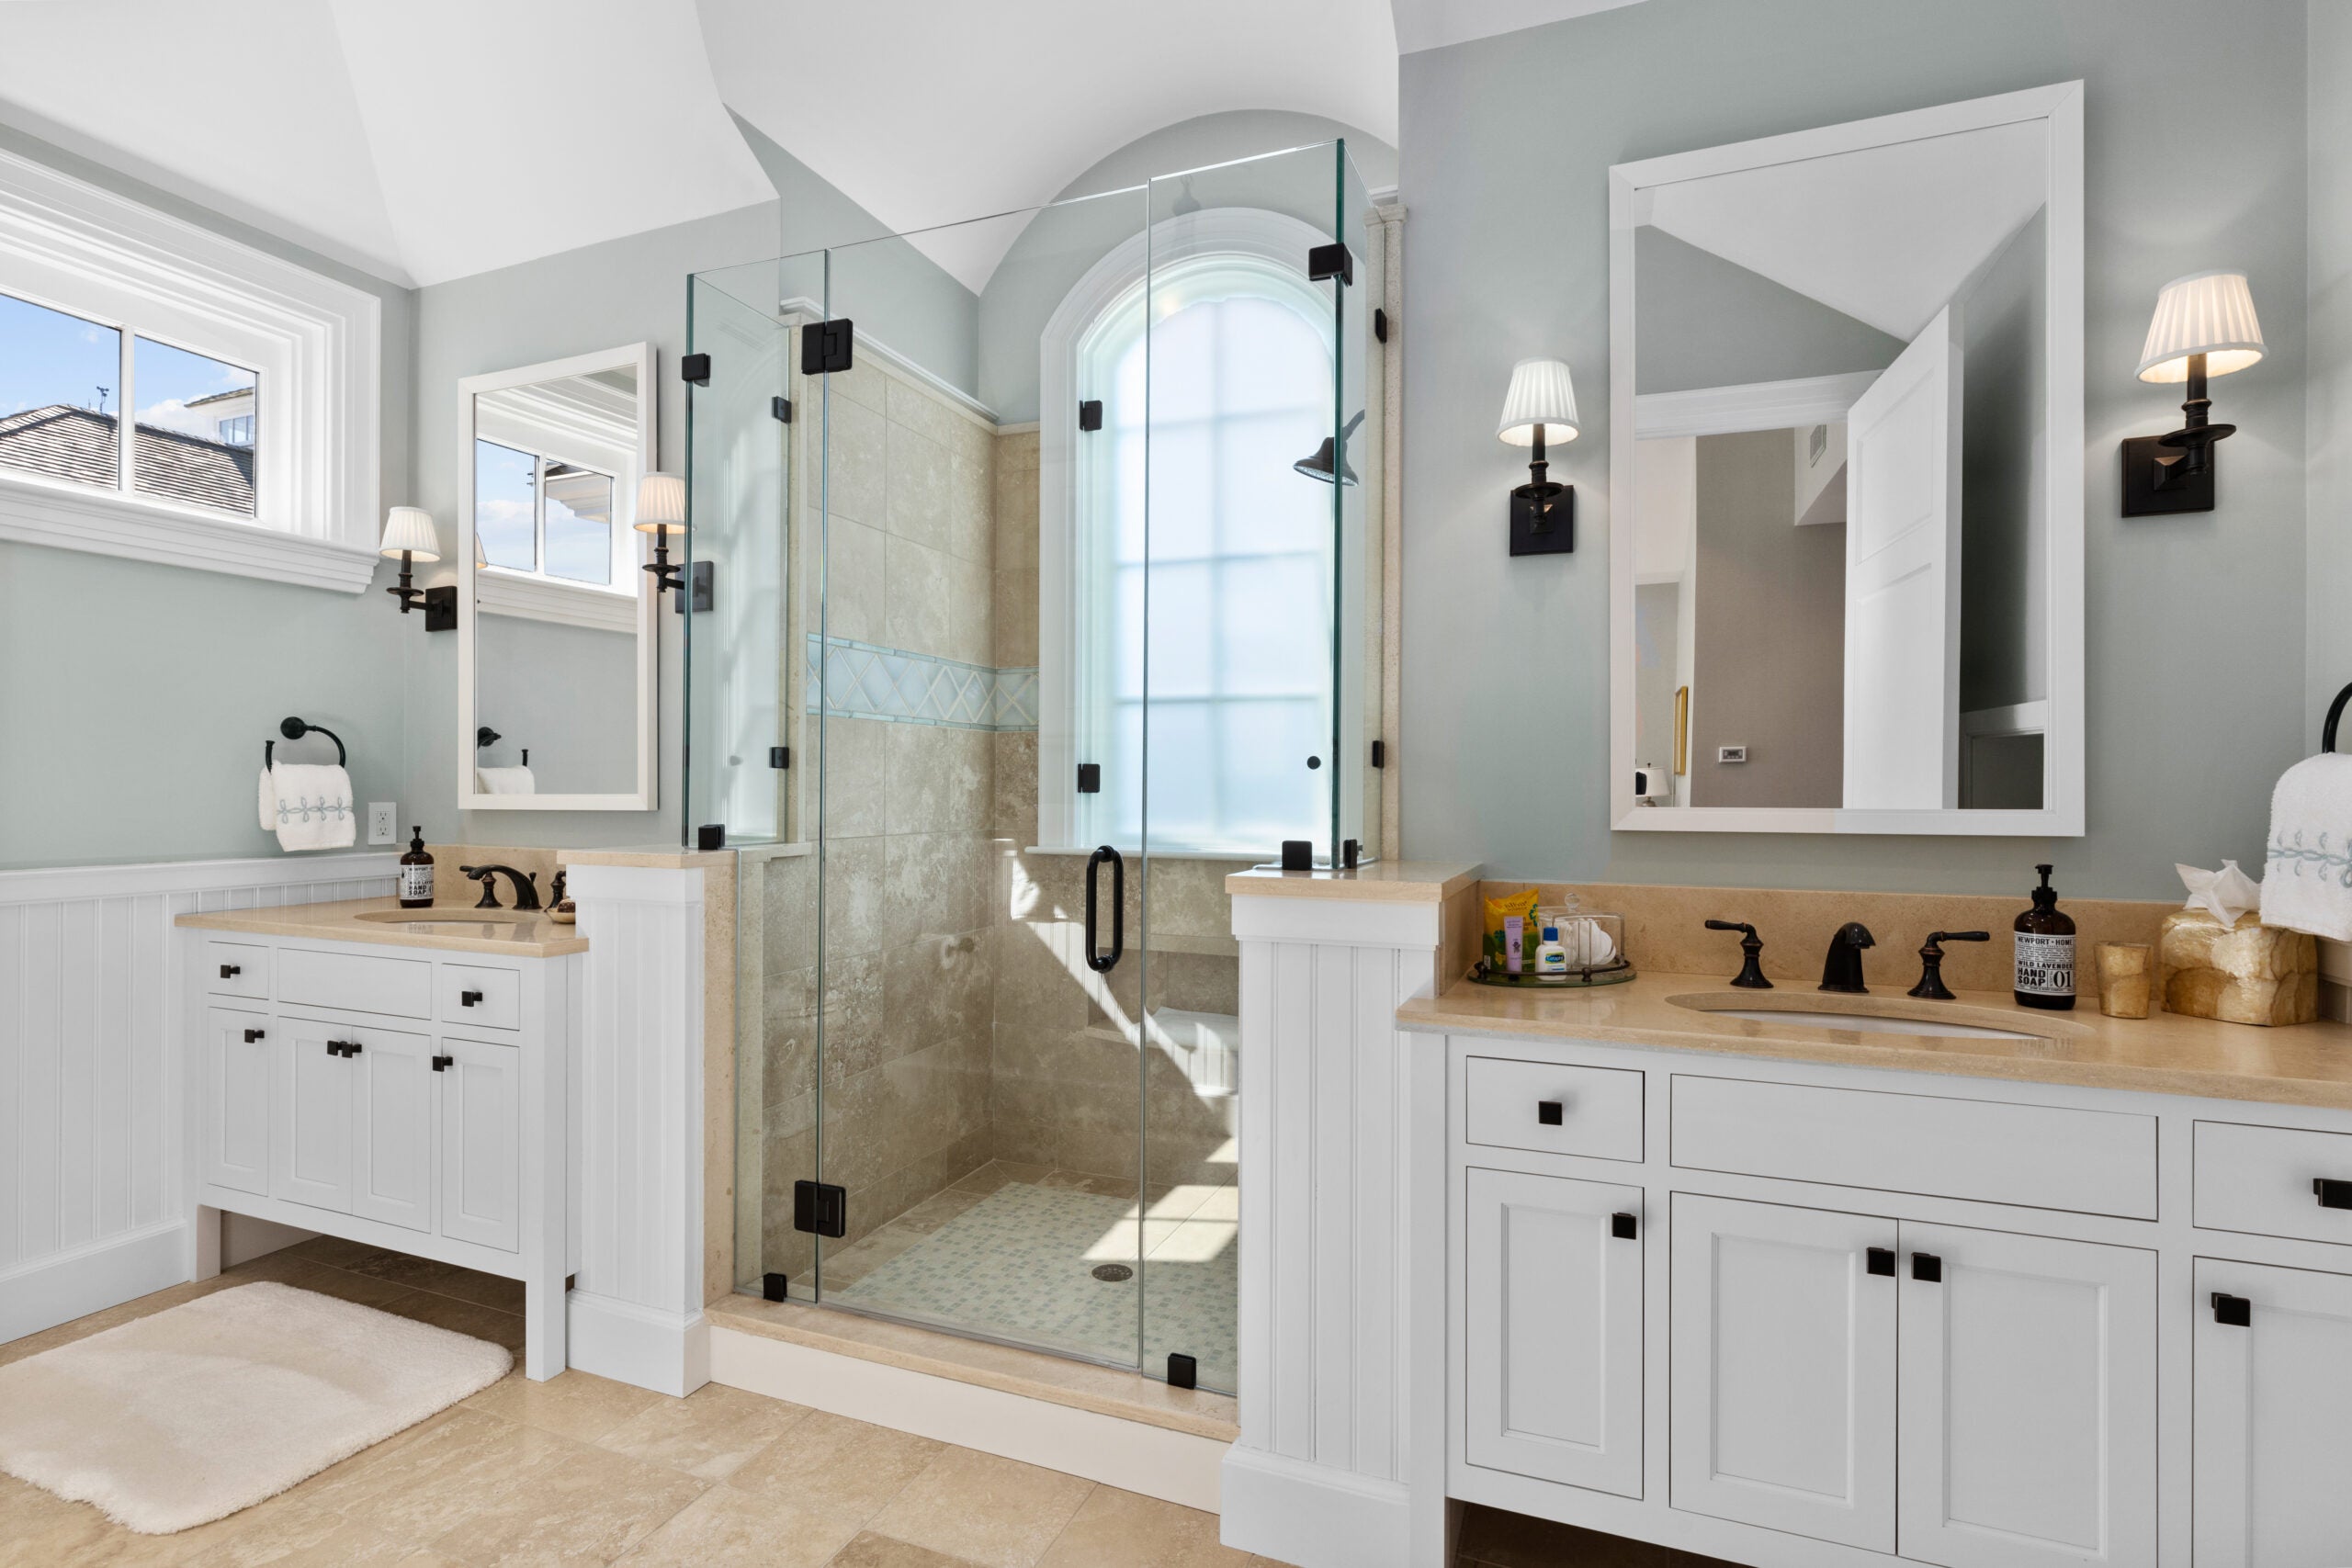 A shower with an arched window, black fixtures, and a ceramic surround with an inlay is flanked by two vanities with black fixtures, tall and rectangular white-framed mirrors, shaded sconces, white cabinetry with black handles, and sandy-colored counters. The flooring is a sand-colored tile, and the walls are gray.